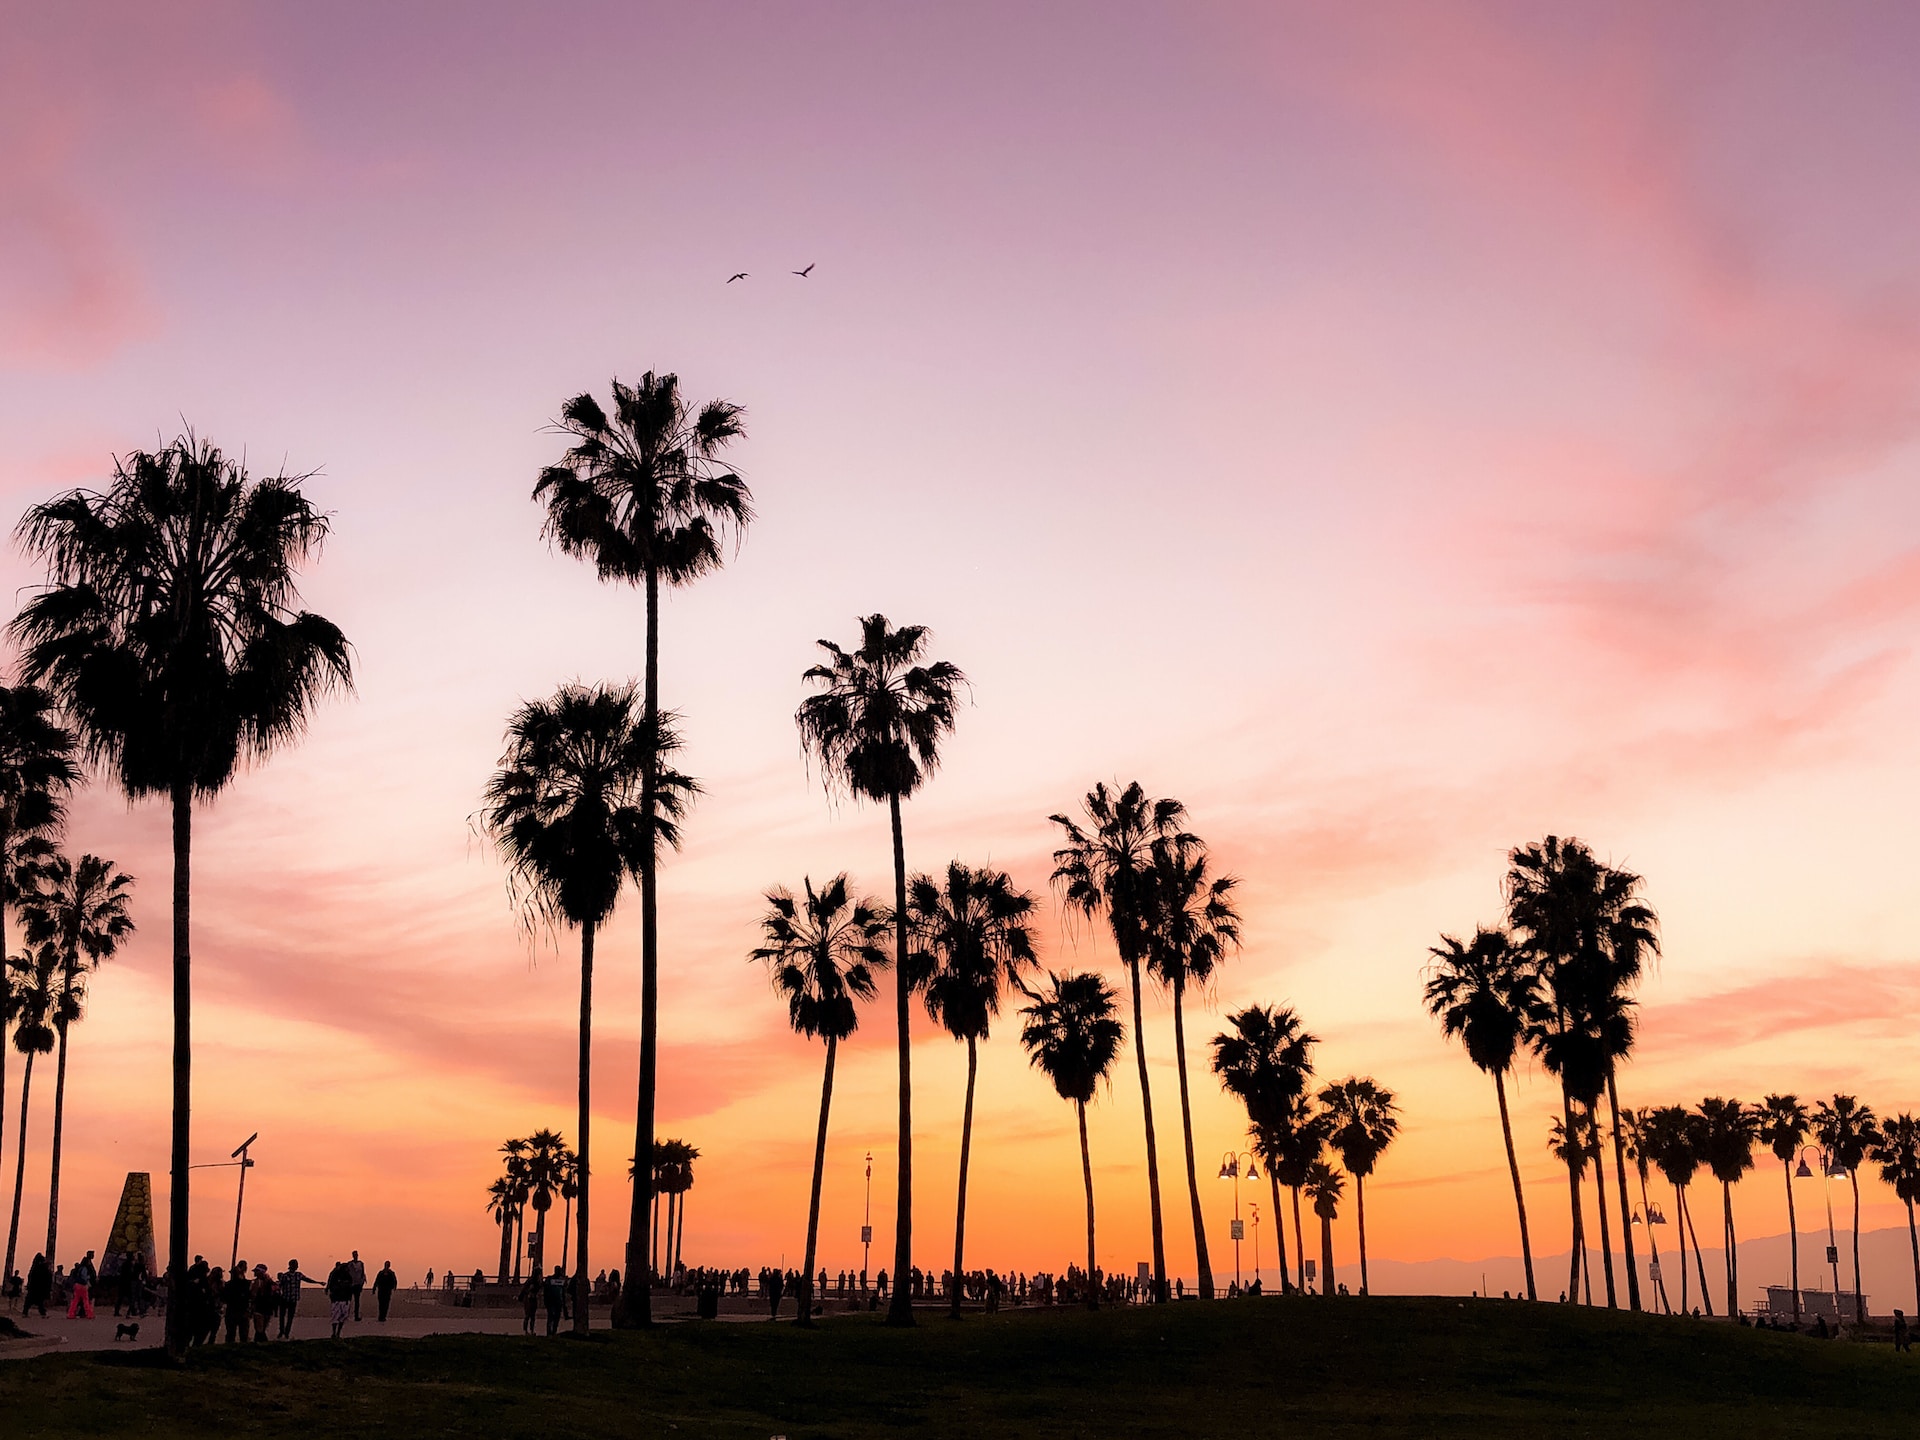 Palm trees on the beach during sunset in LA.